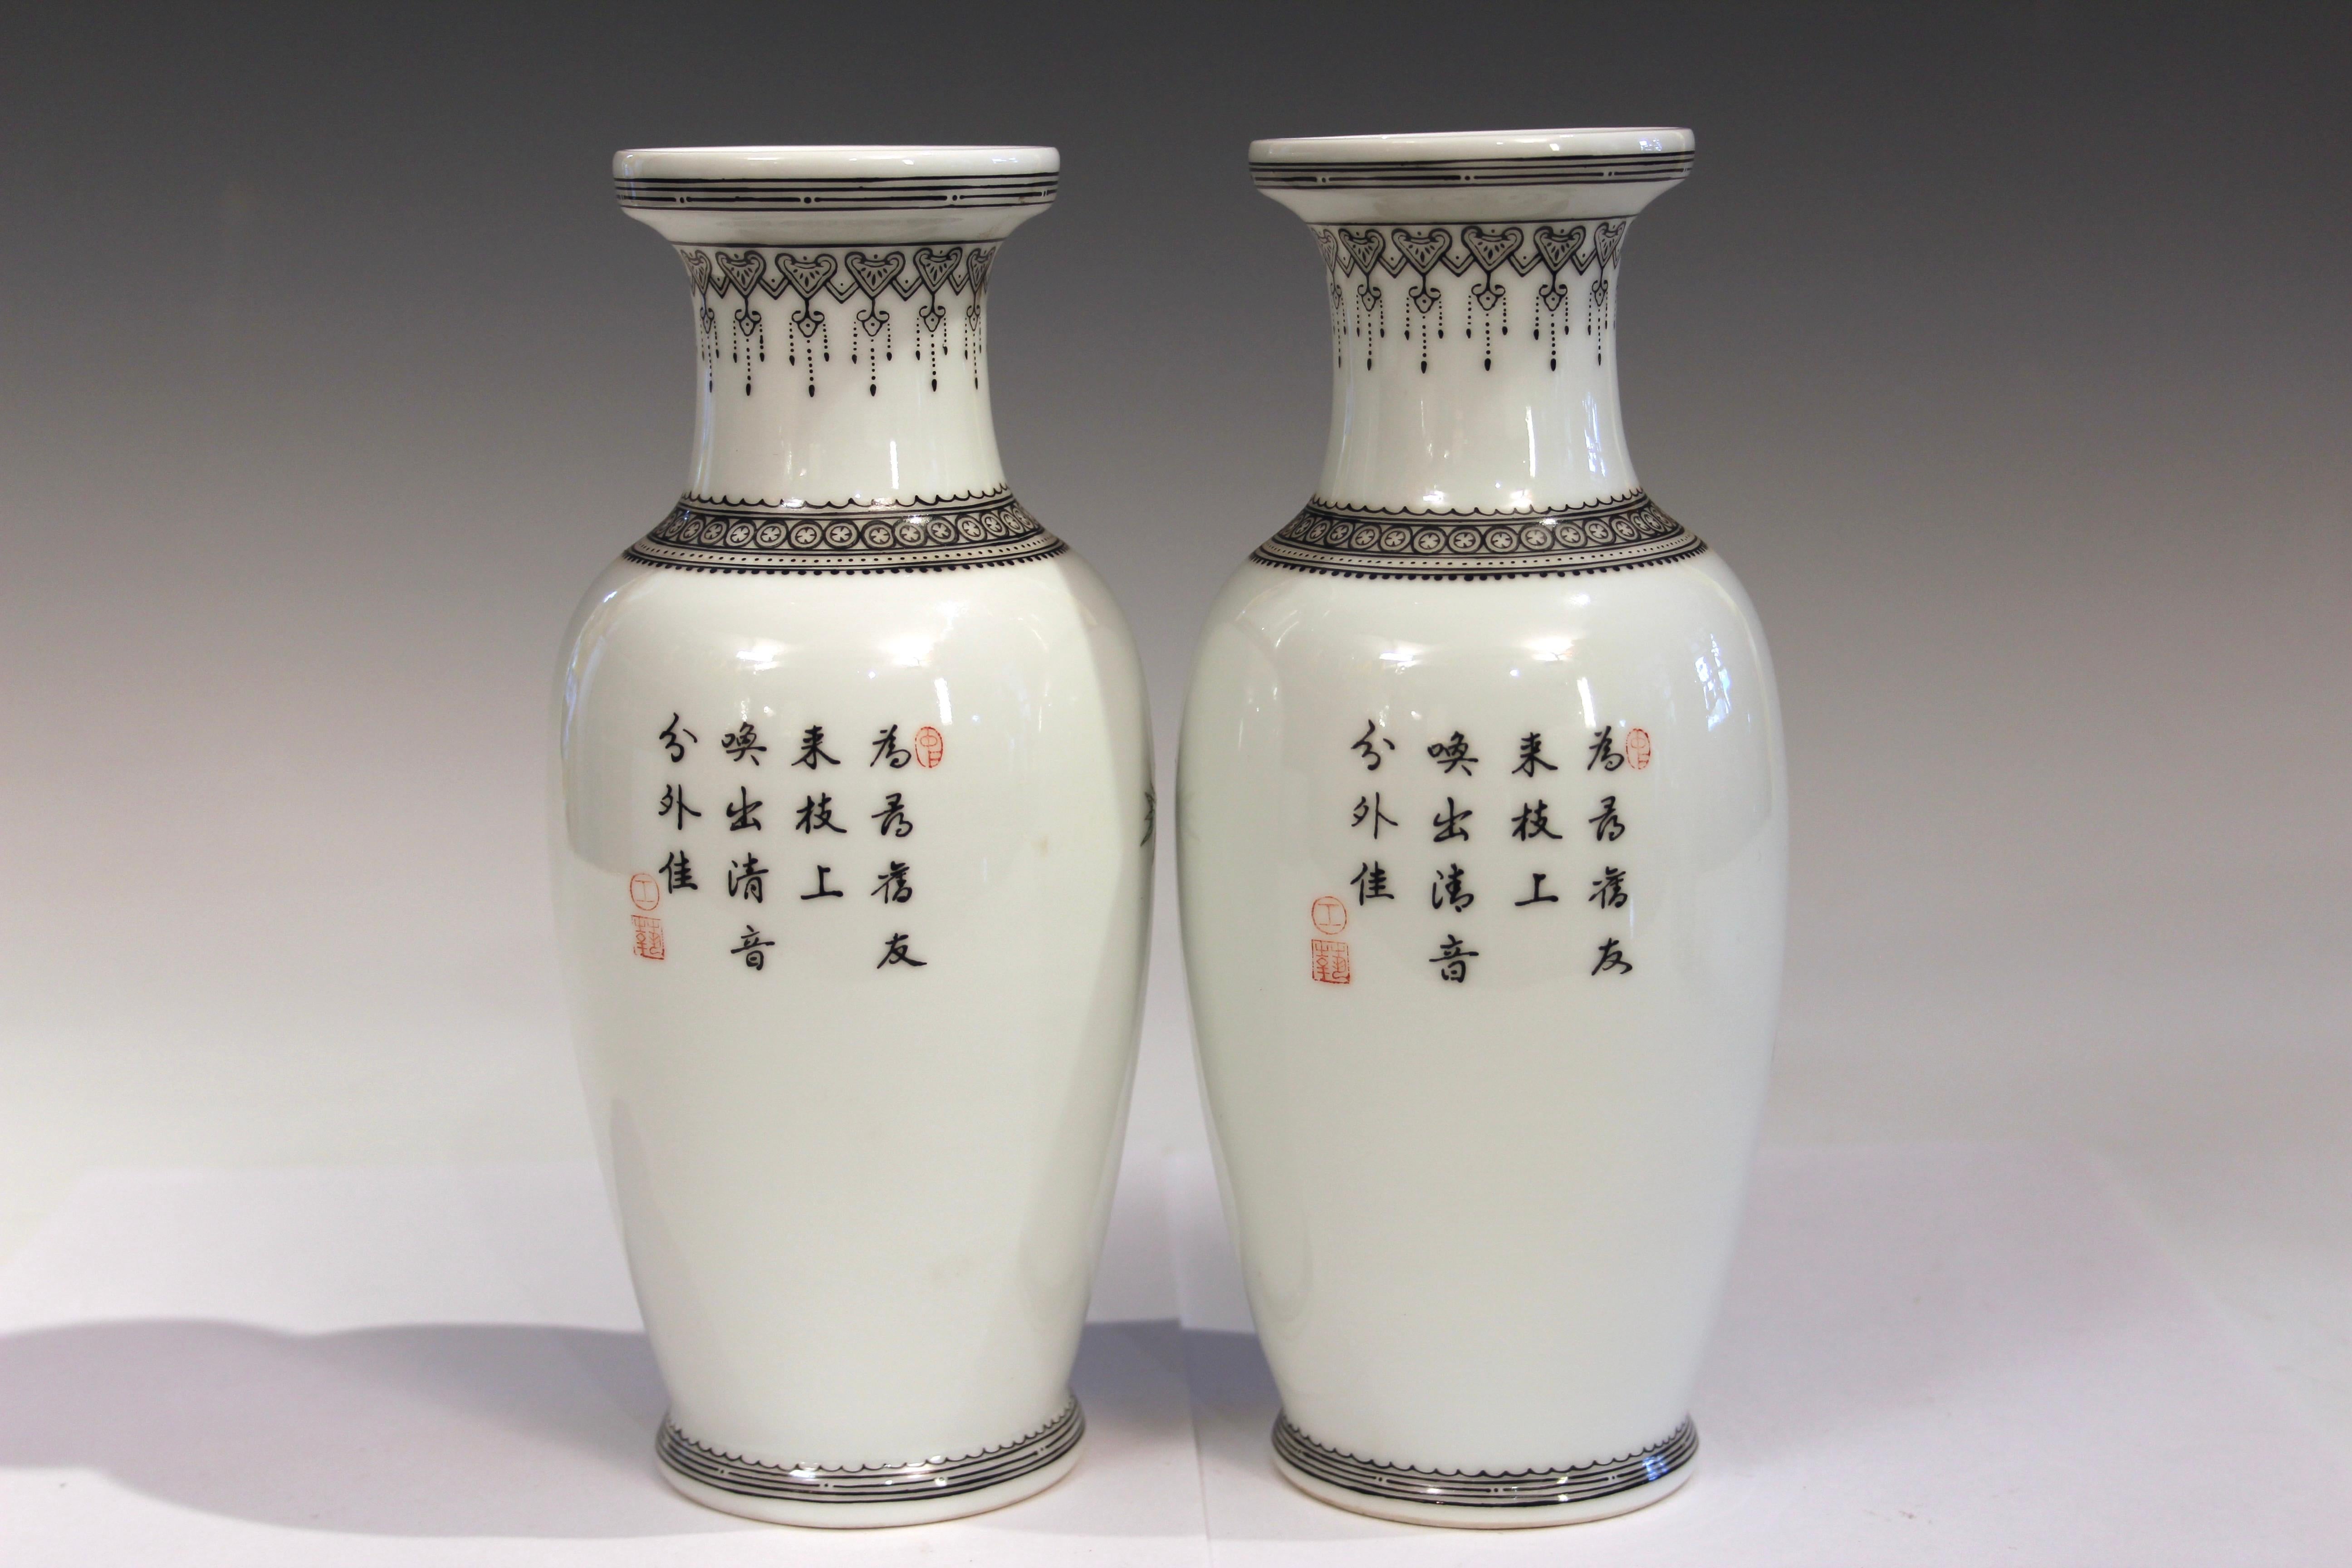 Matched pair Chinese export porcelain famille rose vases, circa late 20th century. Hand turned with nice quality painting. Decorated with birds amongst blossoms on front, poems on reverse. Four character Jingdezhen Zhi marks on base. Original paper